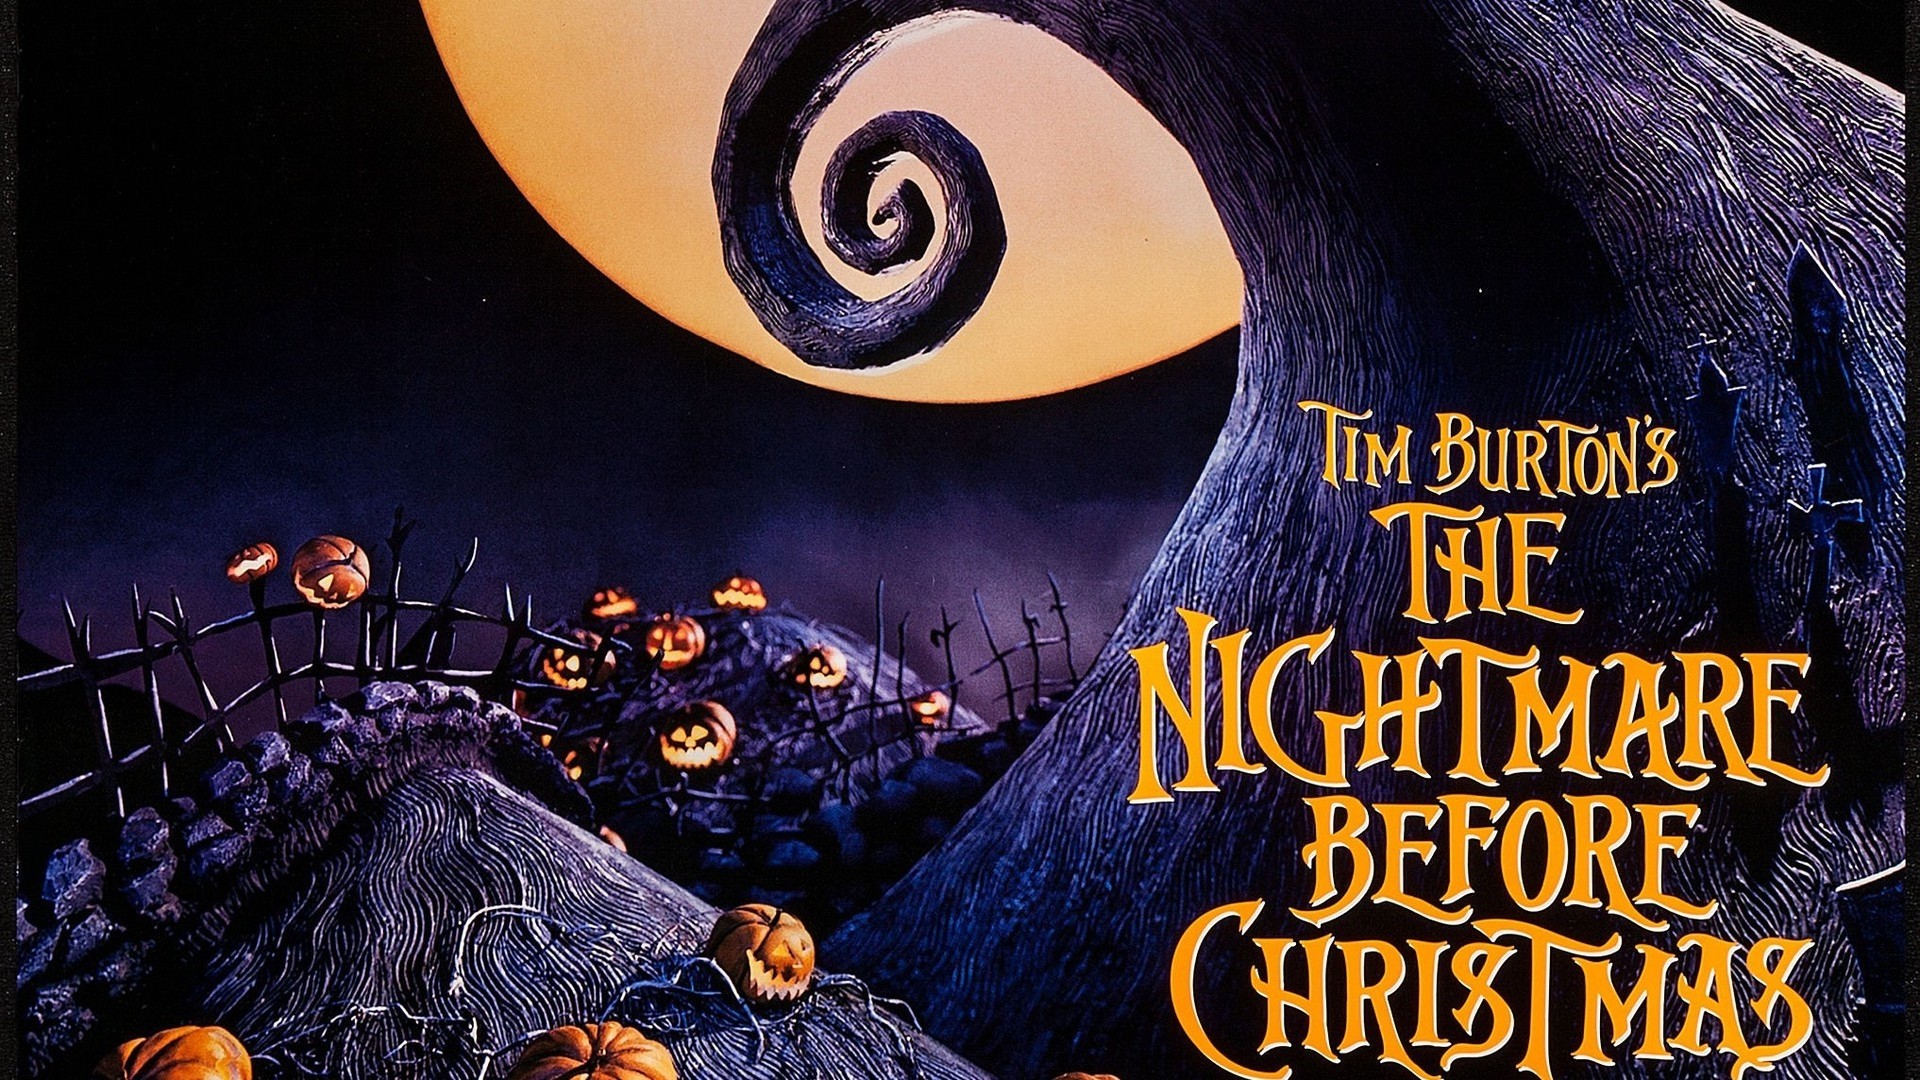 1920x1080 ... The Nightmare Before Christmas Wallpaper The nightmare before christmas  movie posters wallpapers Nightmare Before Christmas Wallpapers Jack  Skellington ...